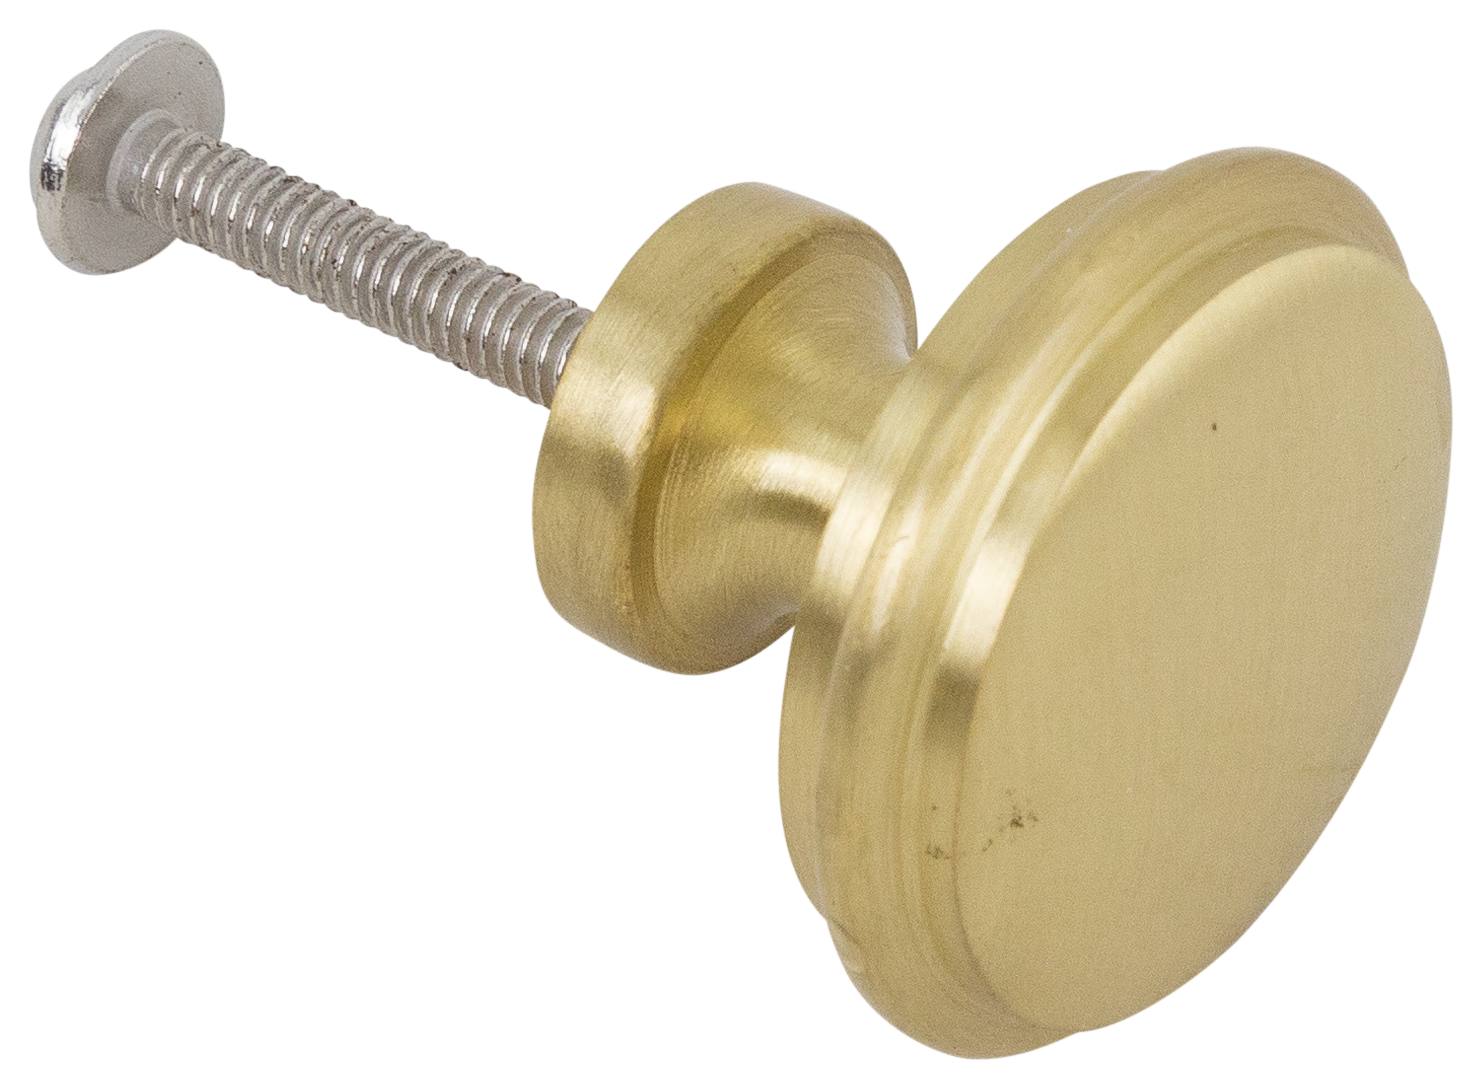 Large Cupboard Knob with Bevelled Edge